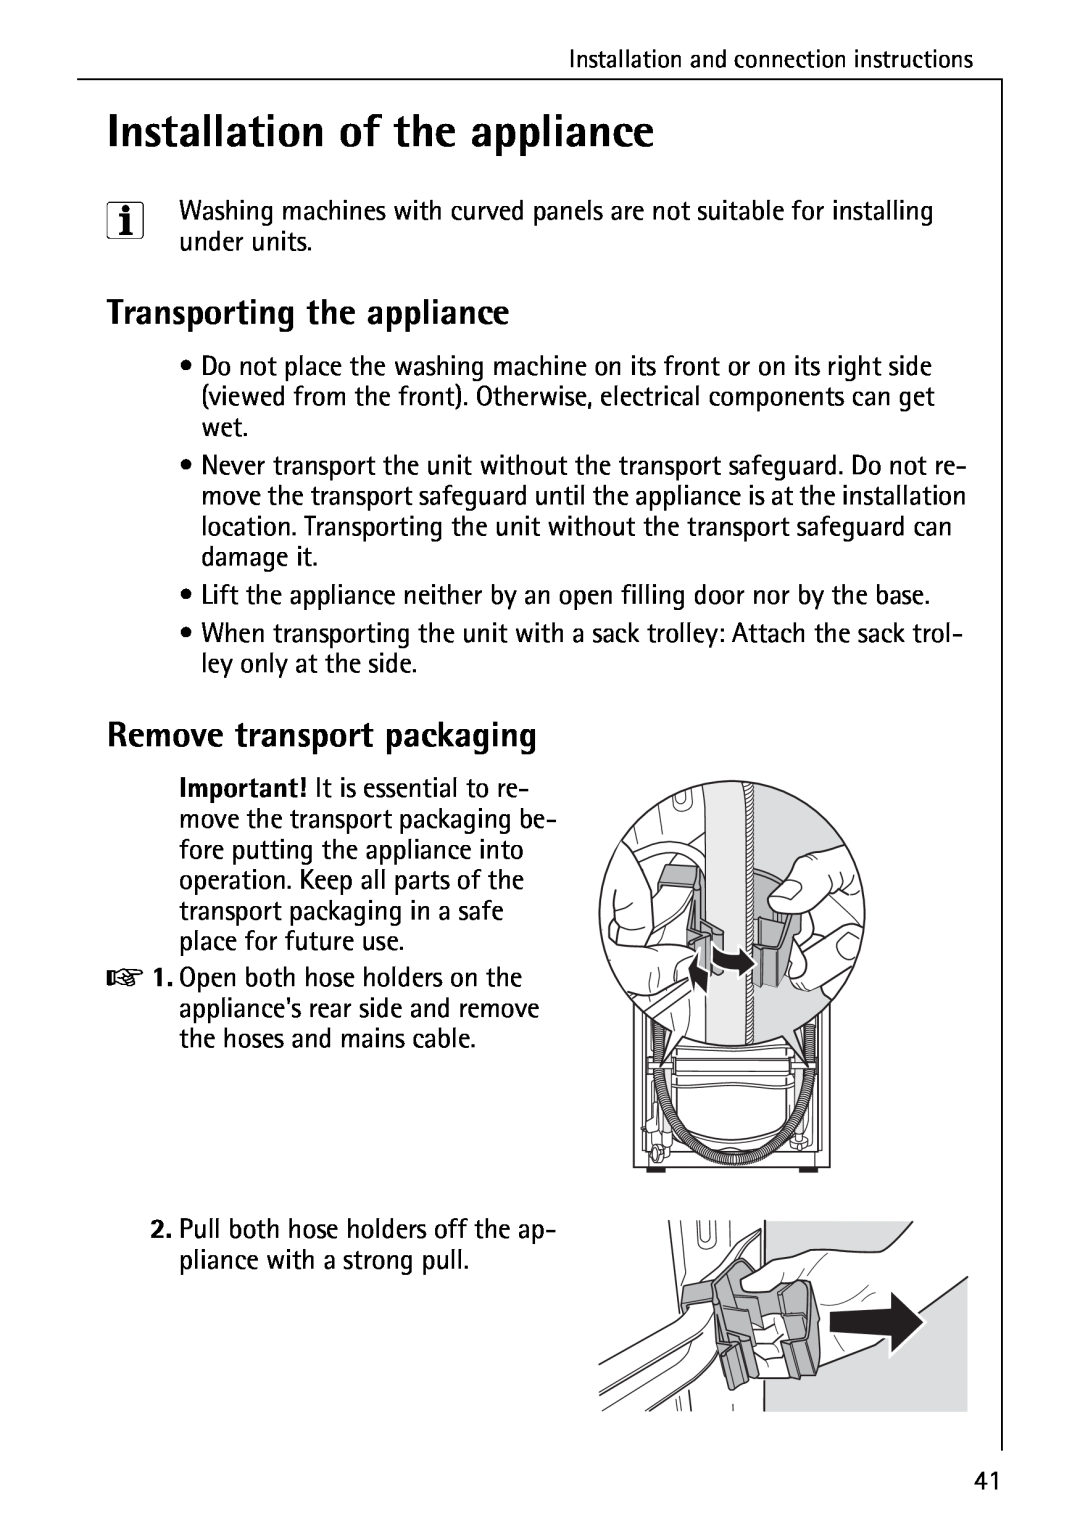 AEG 72640 manual Installation of the appliance, Transporting the appliance, Remove transport packaging 